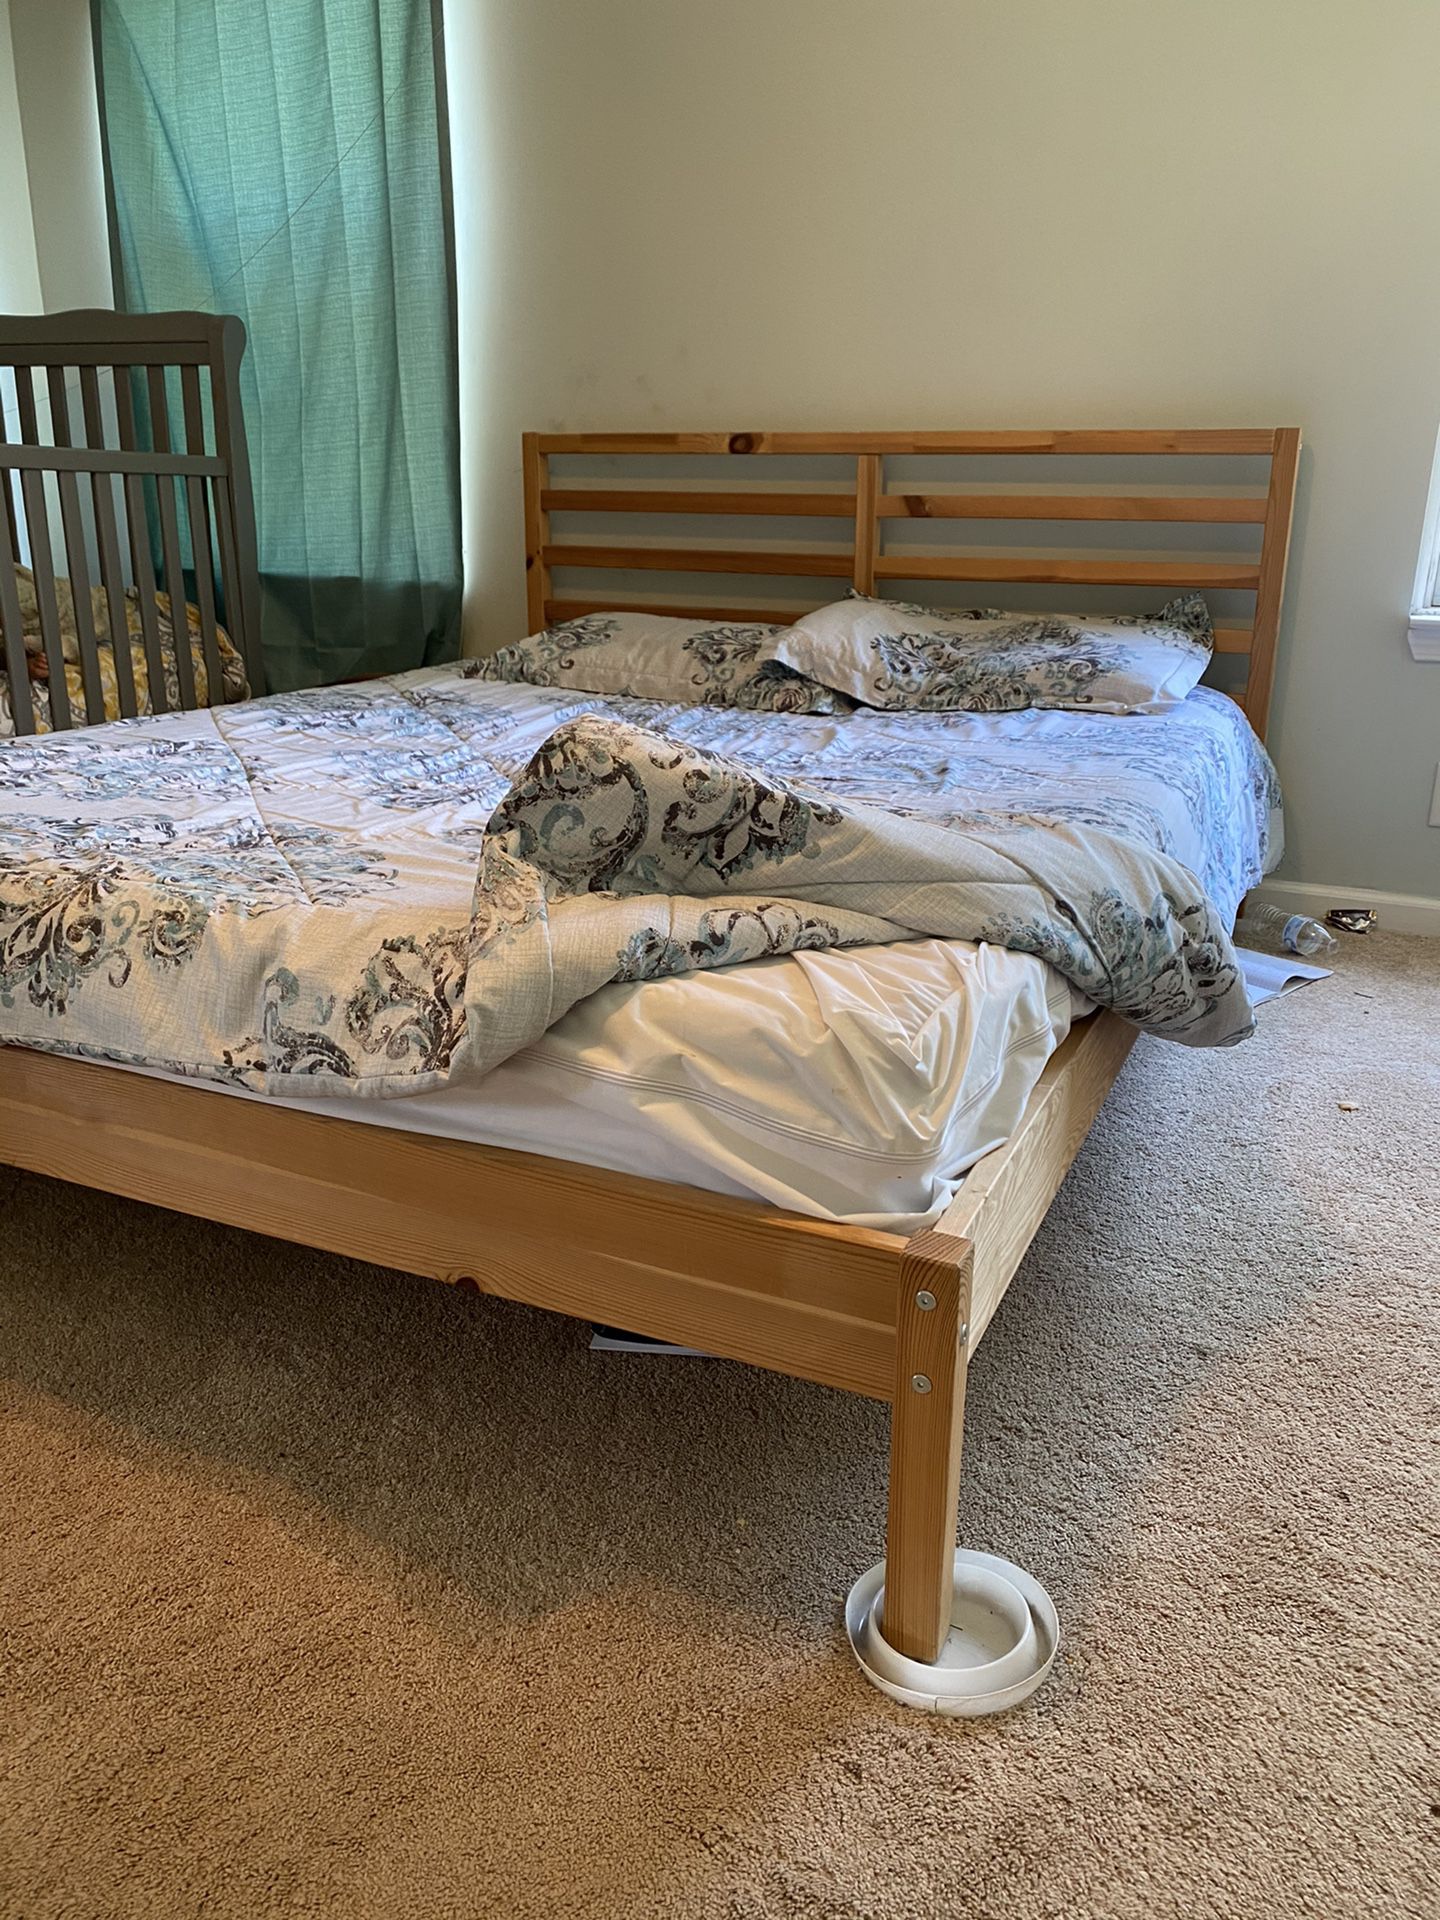 Bed from IKEA + covered mattress (sanitized)